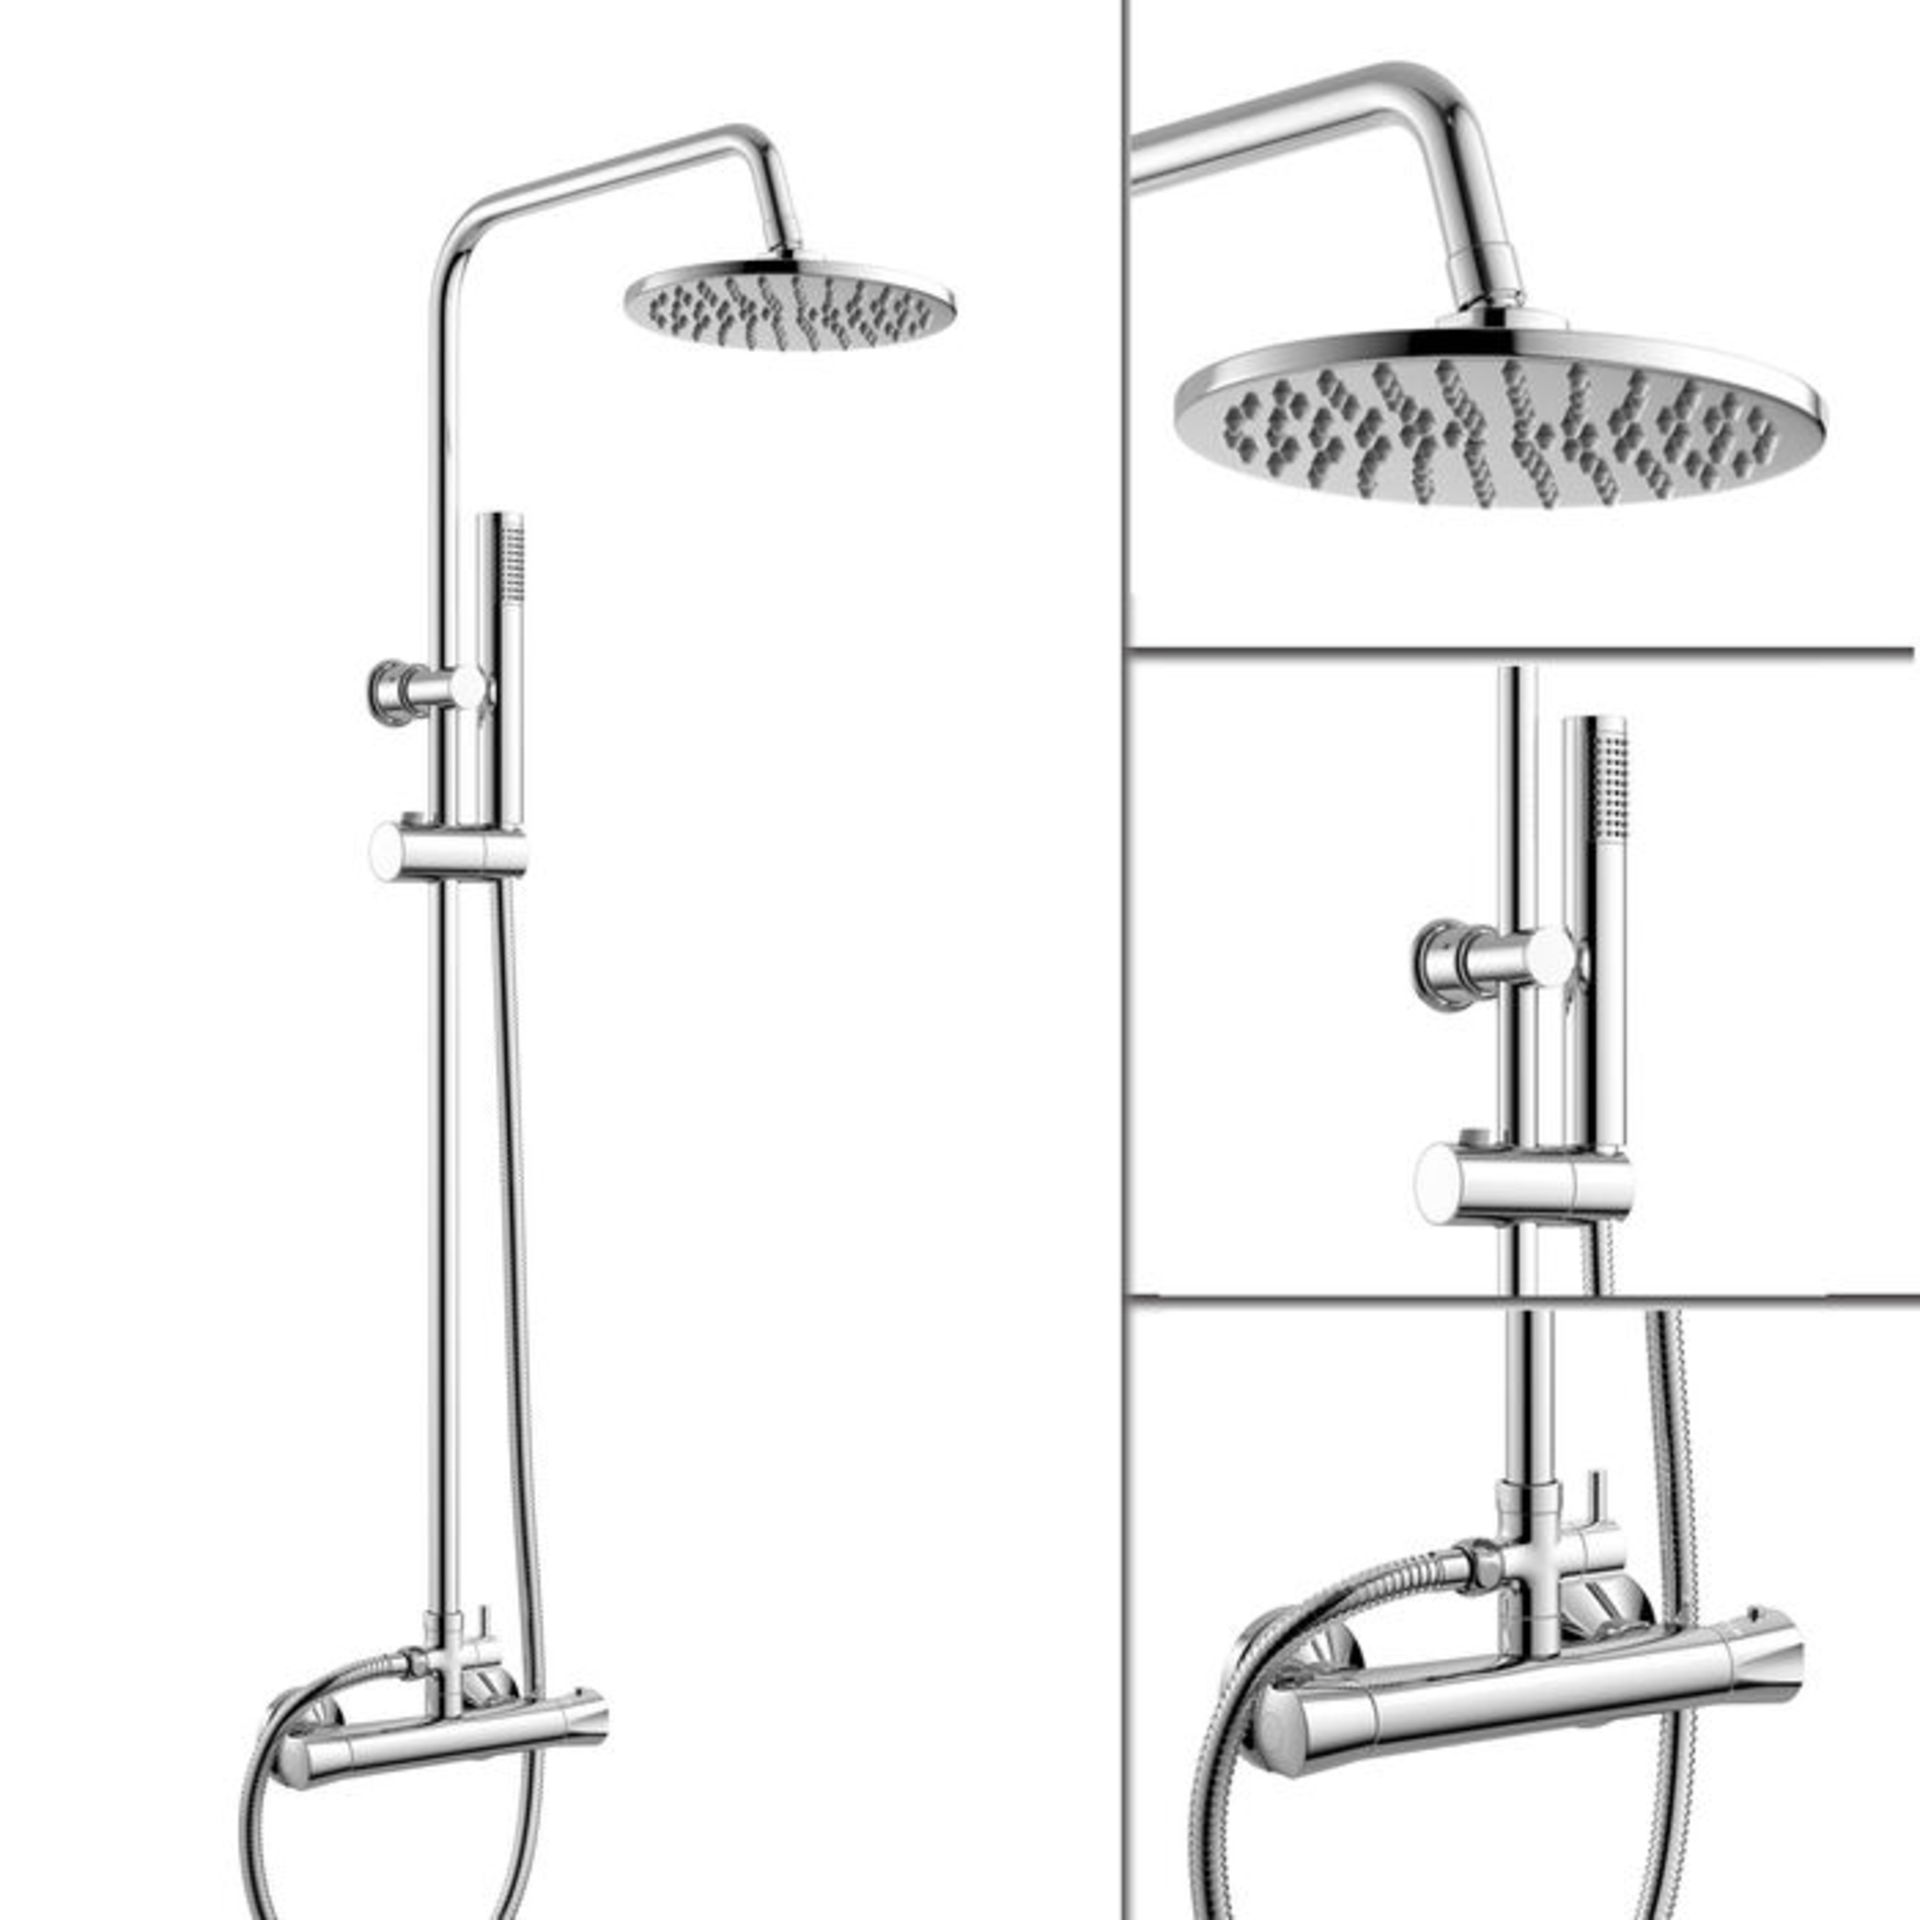 (AA123) Round Exposed Thermostatic Shower Kit. RRP £349.99. Style meets function with our gor...( - Image 2 of 2